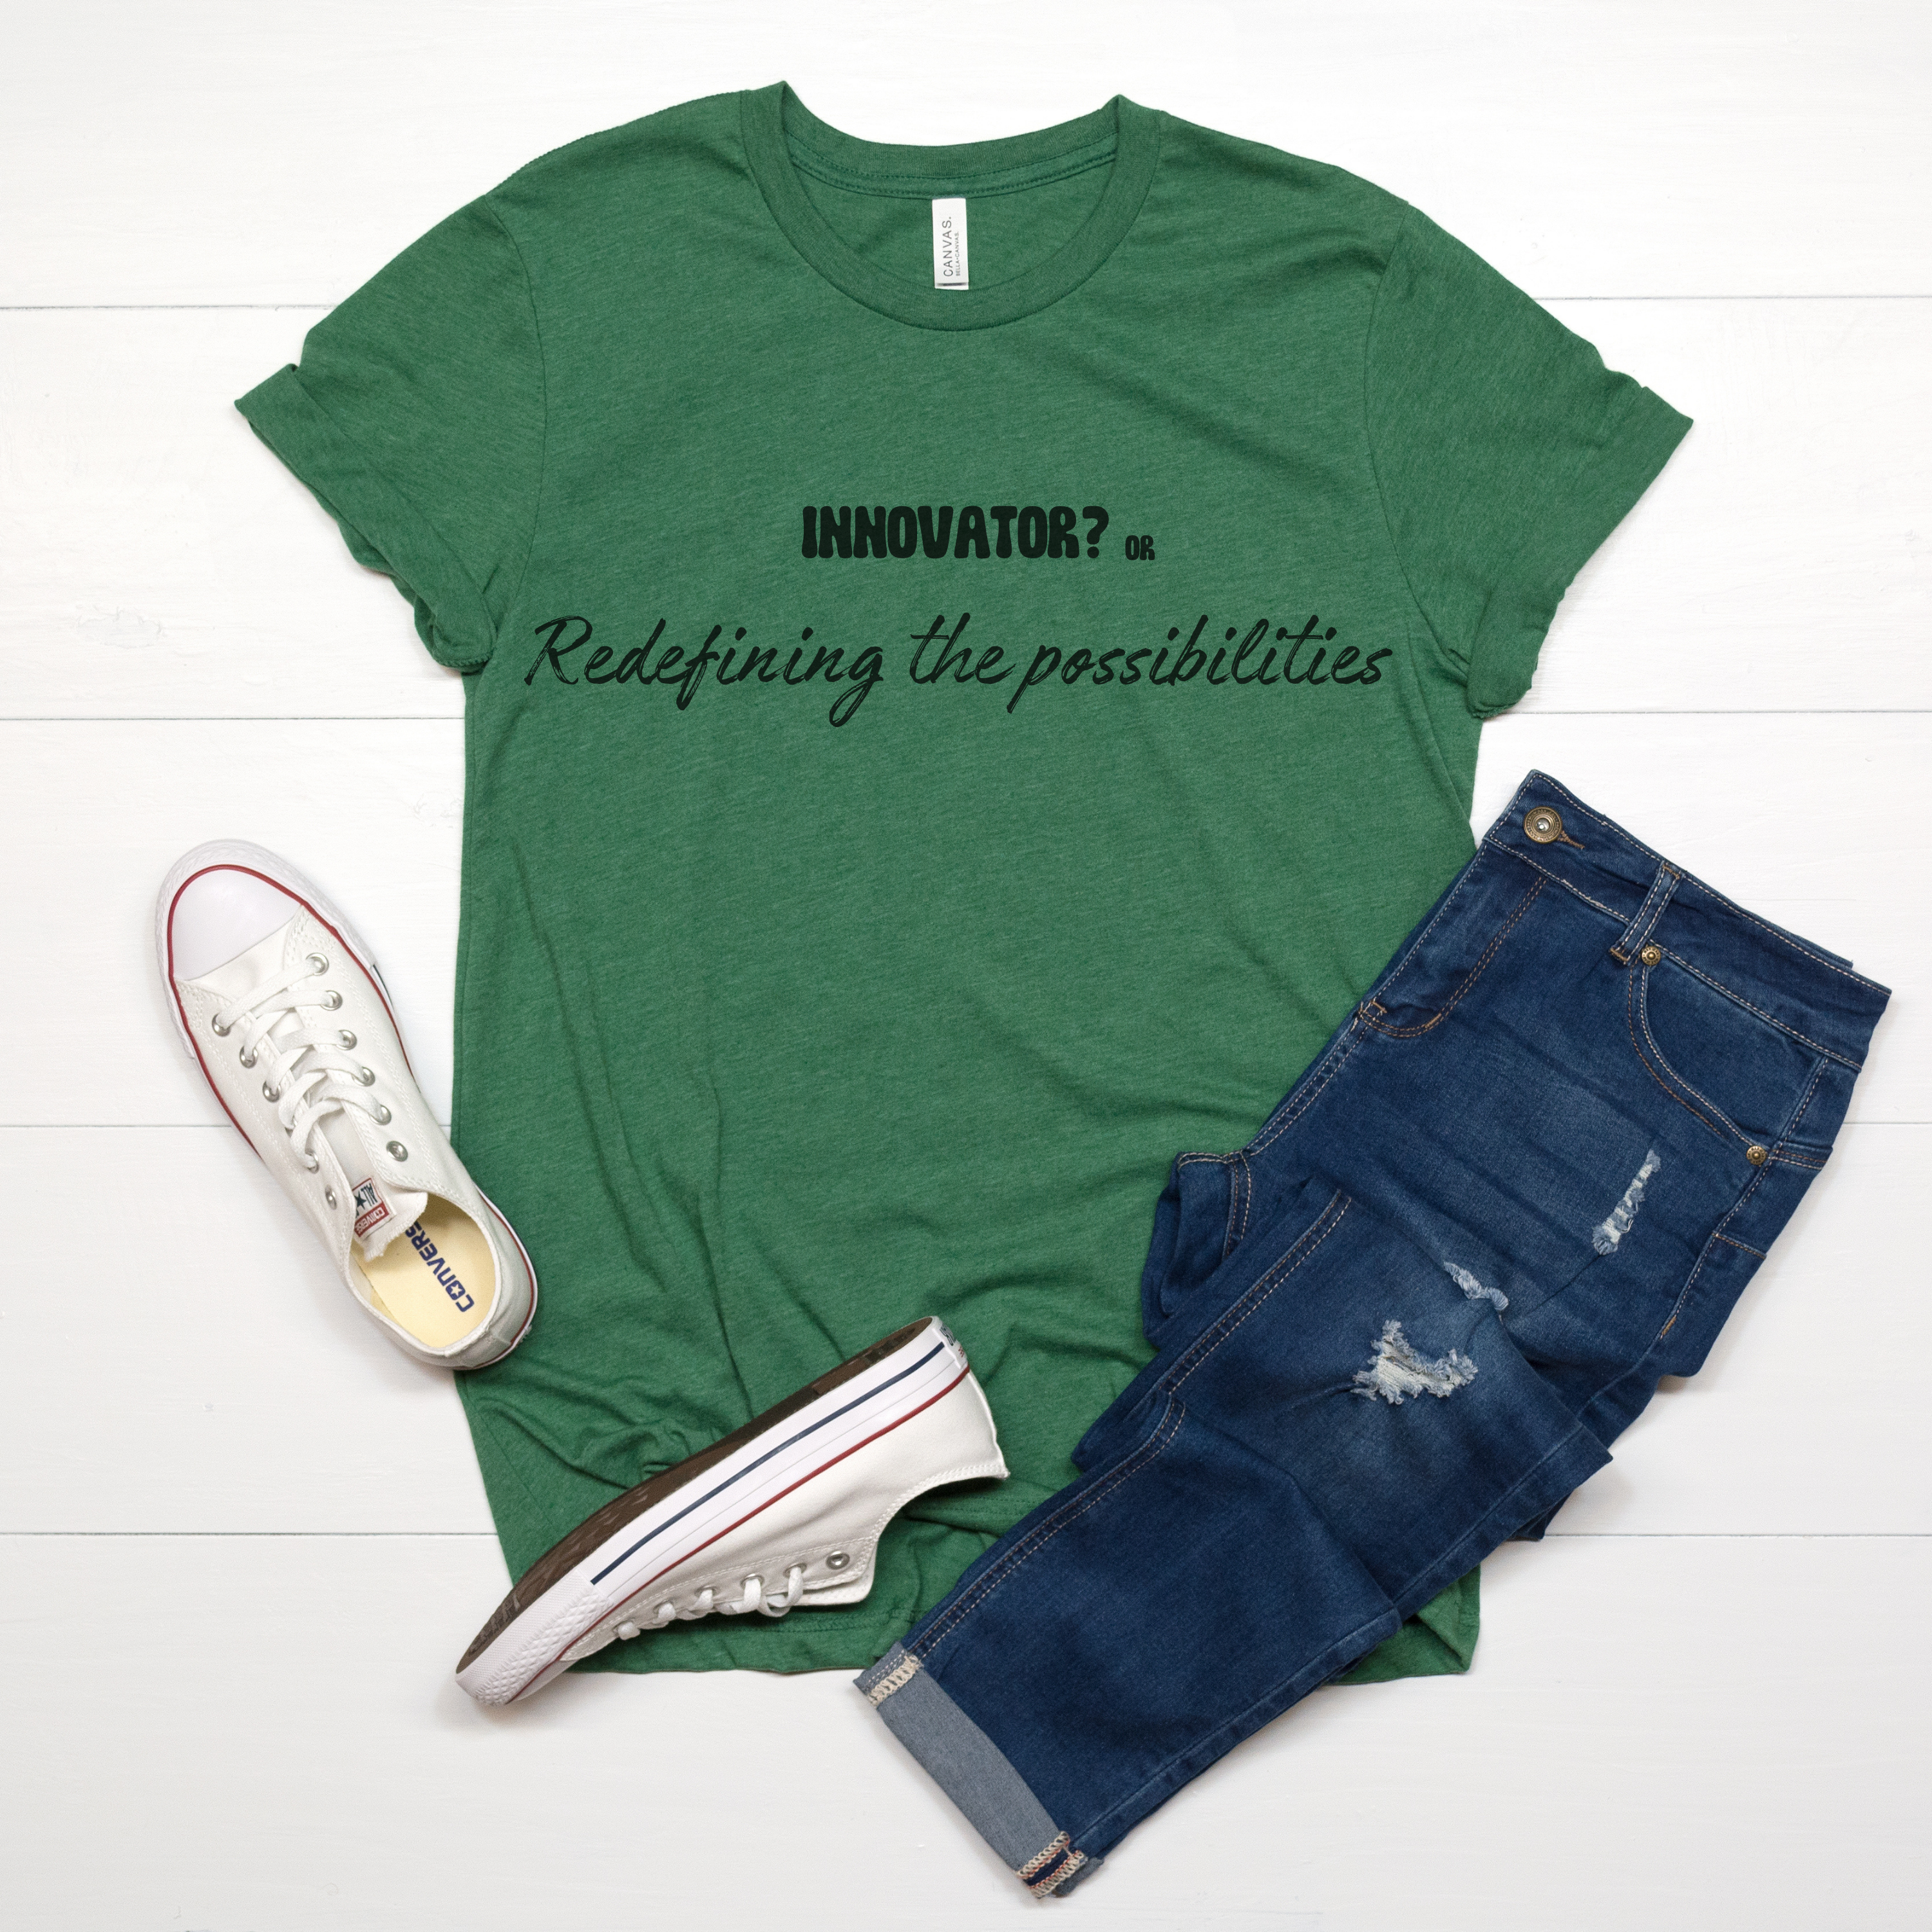 Innovator? or Redefining the possibilities T-shirt.